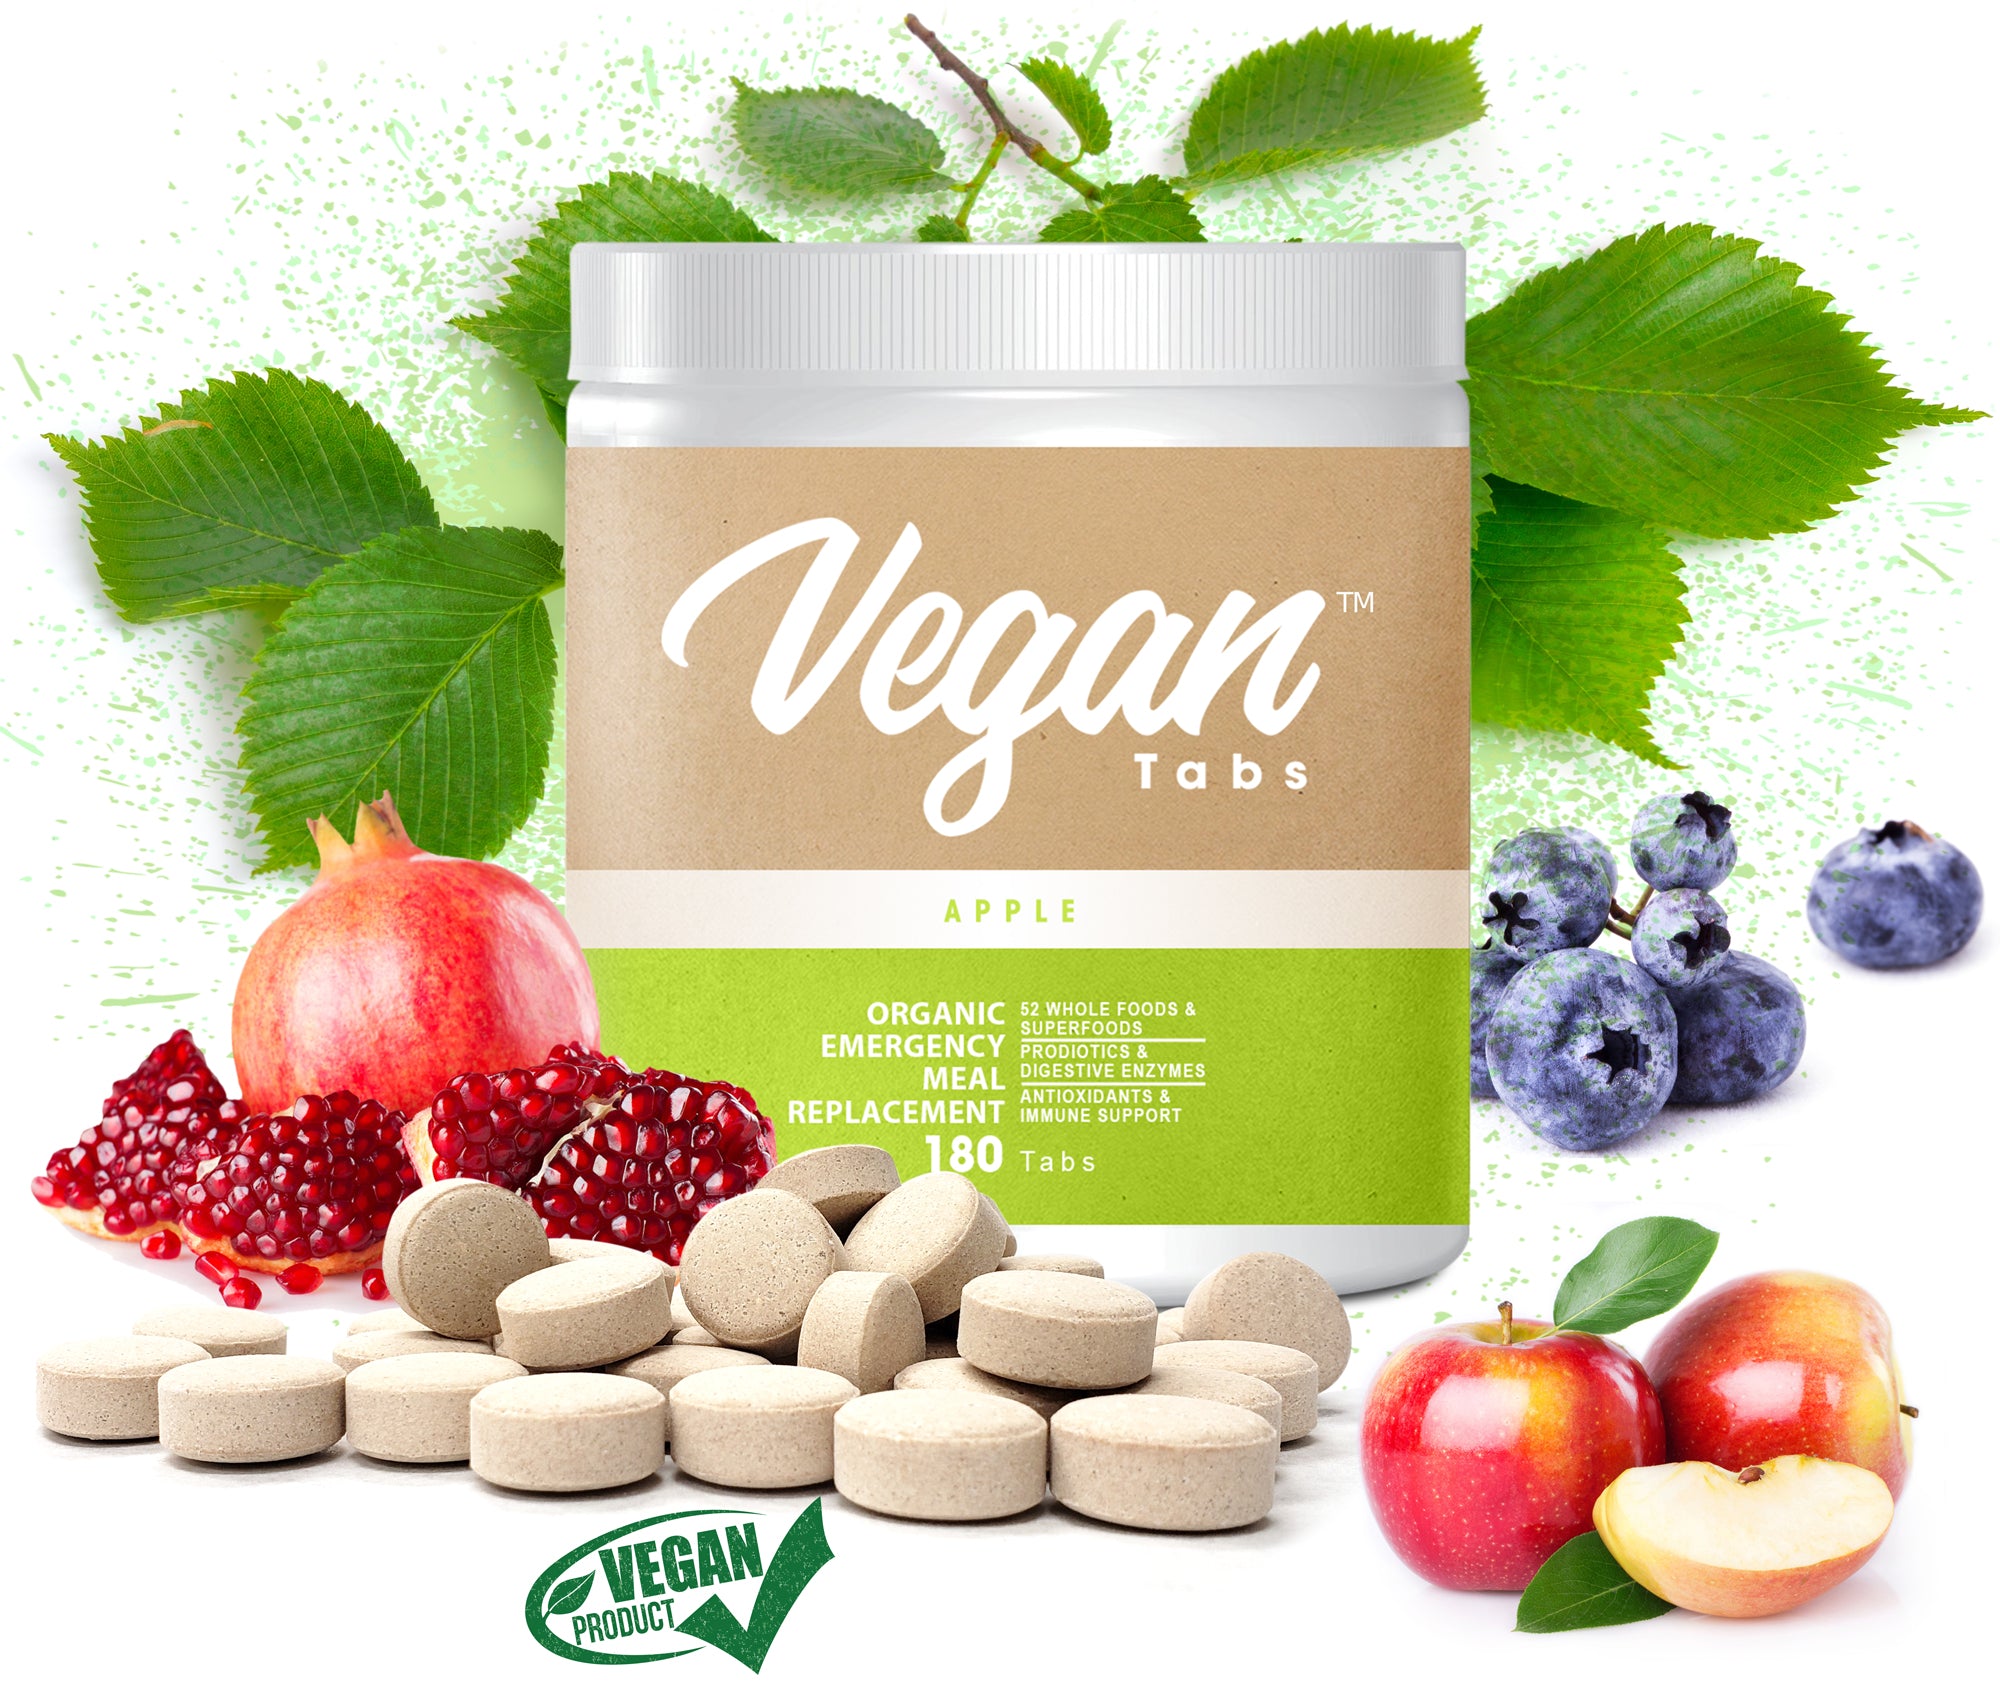 Vegan Tabs 180 Complete Plant-Based  food tablets, Non-GMO, Vegan, Dairy-Free, Gluten-Free, Soy Free, Allergy Free w/Digestive Enzymes, Dietary Supplement, Apple